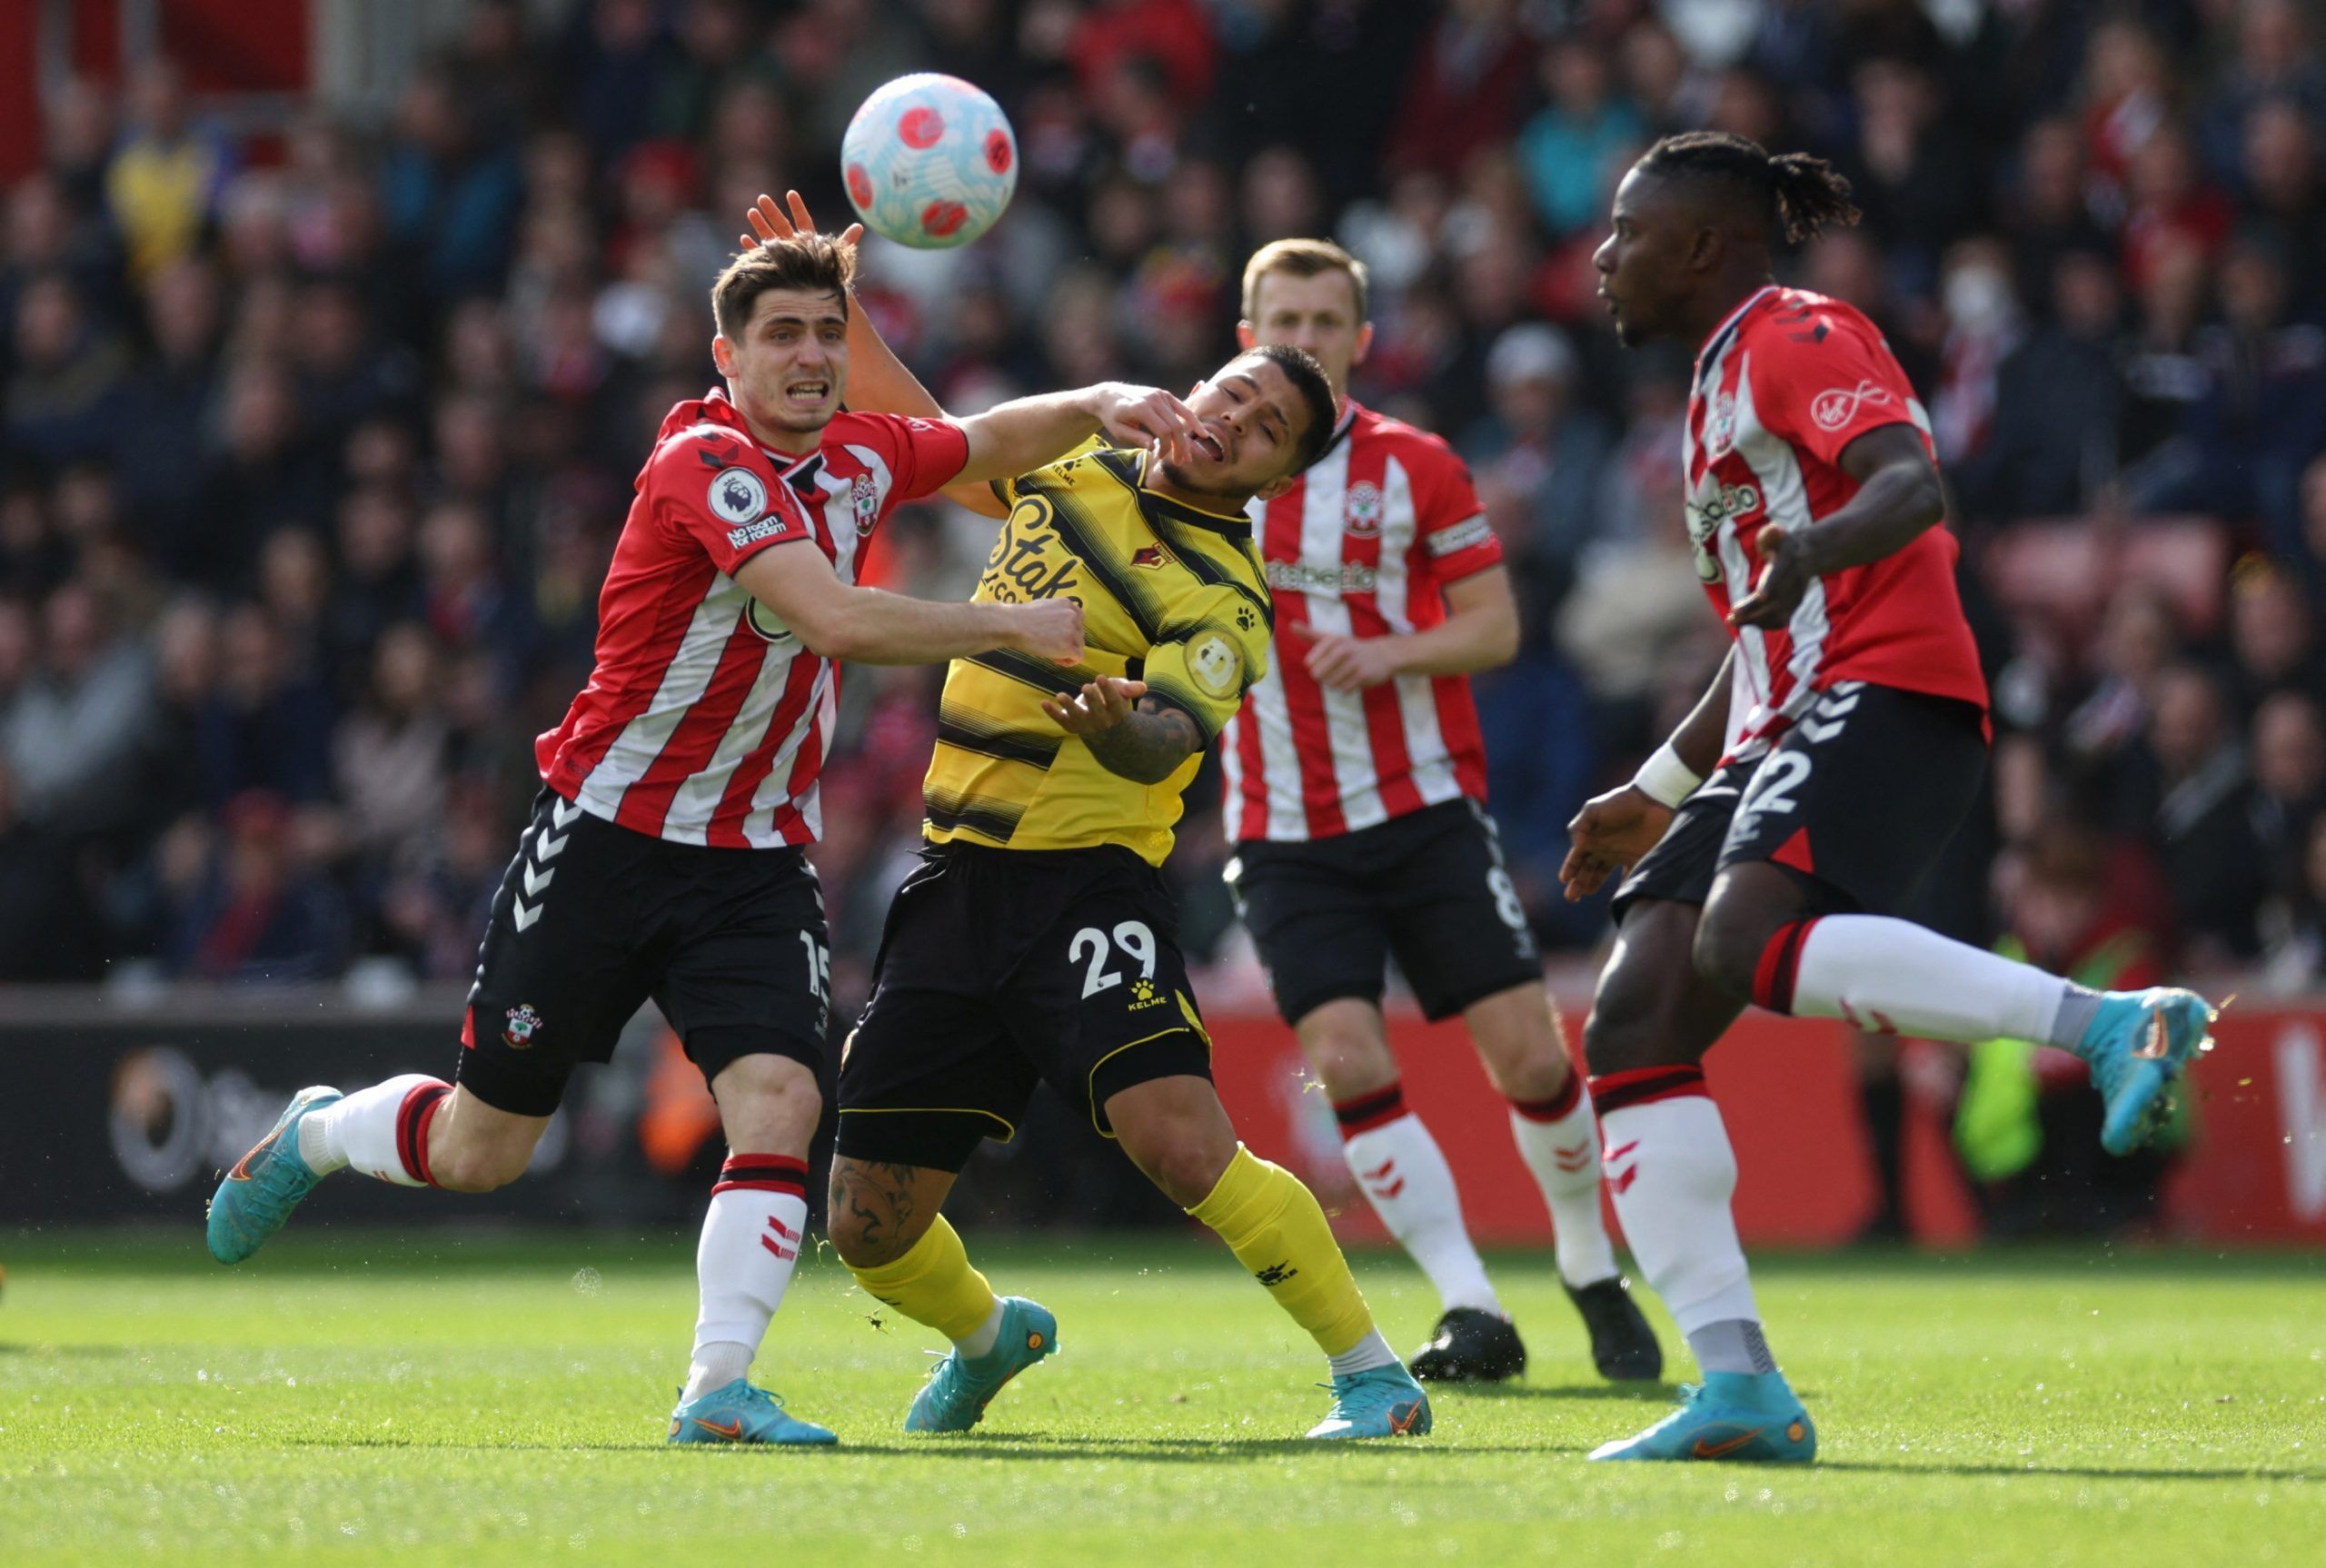 Soccer Football - Premier League - Southampton v Watford - St Mary's Stadium, Southampton, Britain - March 13, 2022 Southampton's Romain Perraud in action with  Watford's Cucho Hernandez Action Images via Reuters/Paul Childs EDITORIAL USE ONLY. No use with unauthorized audio, video, data, fixture lists, club/league logos or 'live' services. Online in-match use limited to 75 images, no video emulation. No use in betting, games or single club /league/player publications.  Please contact your accou